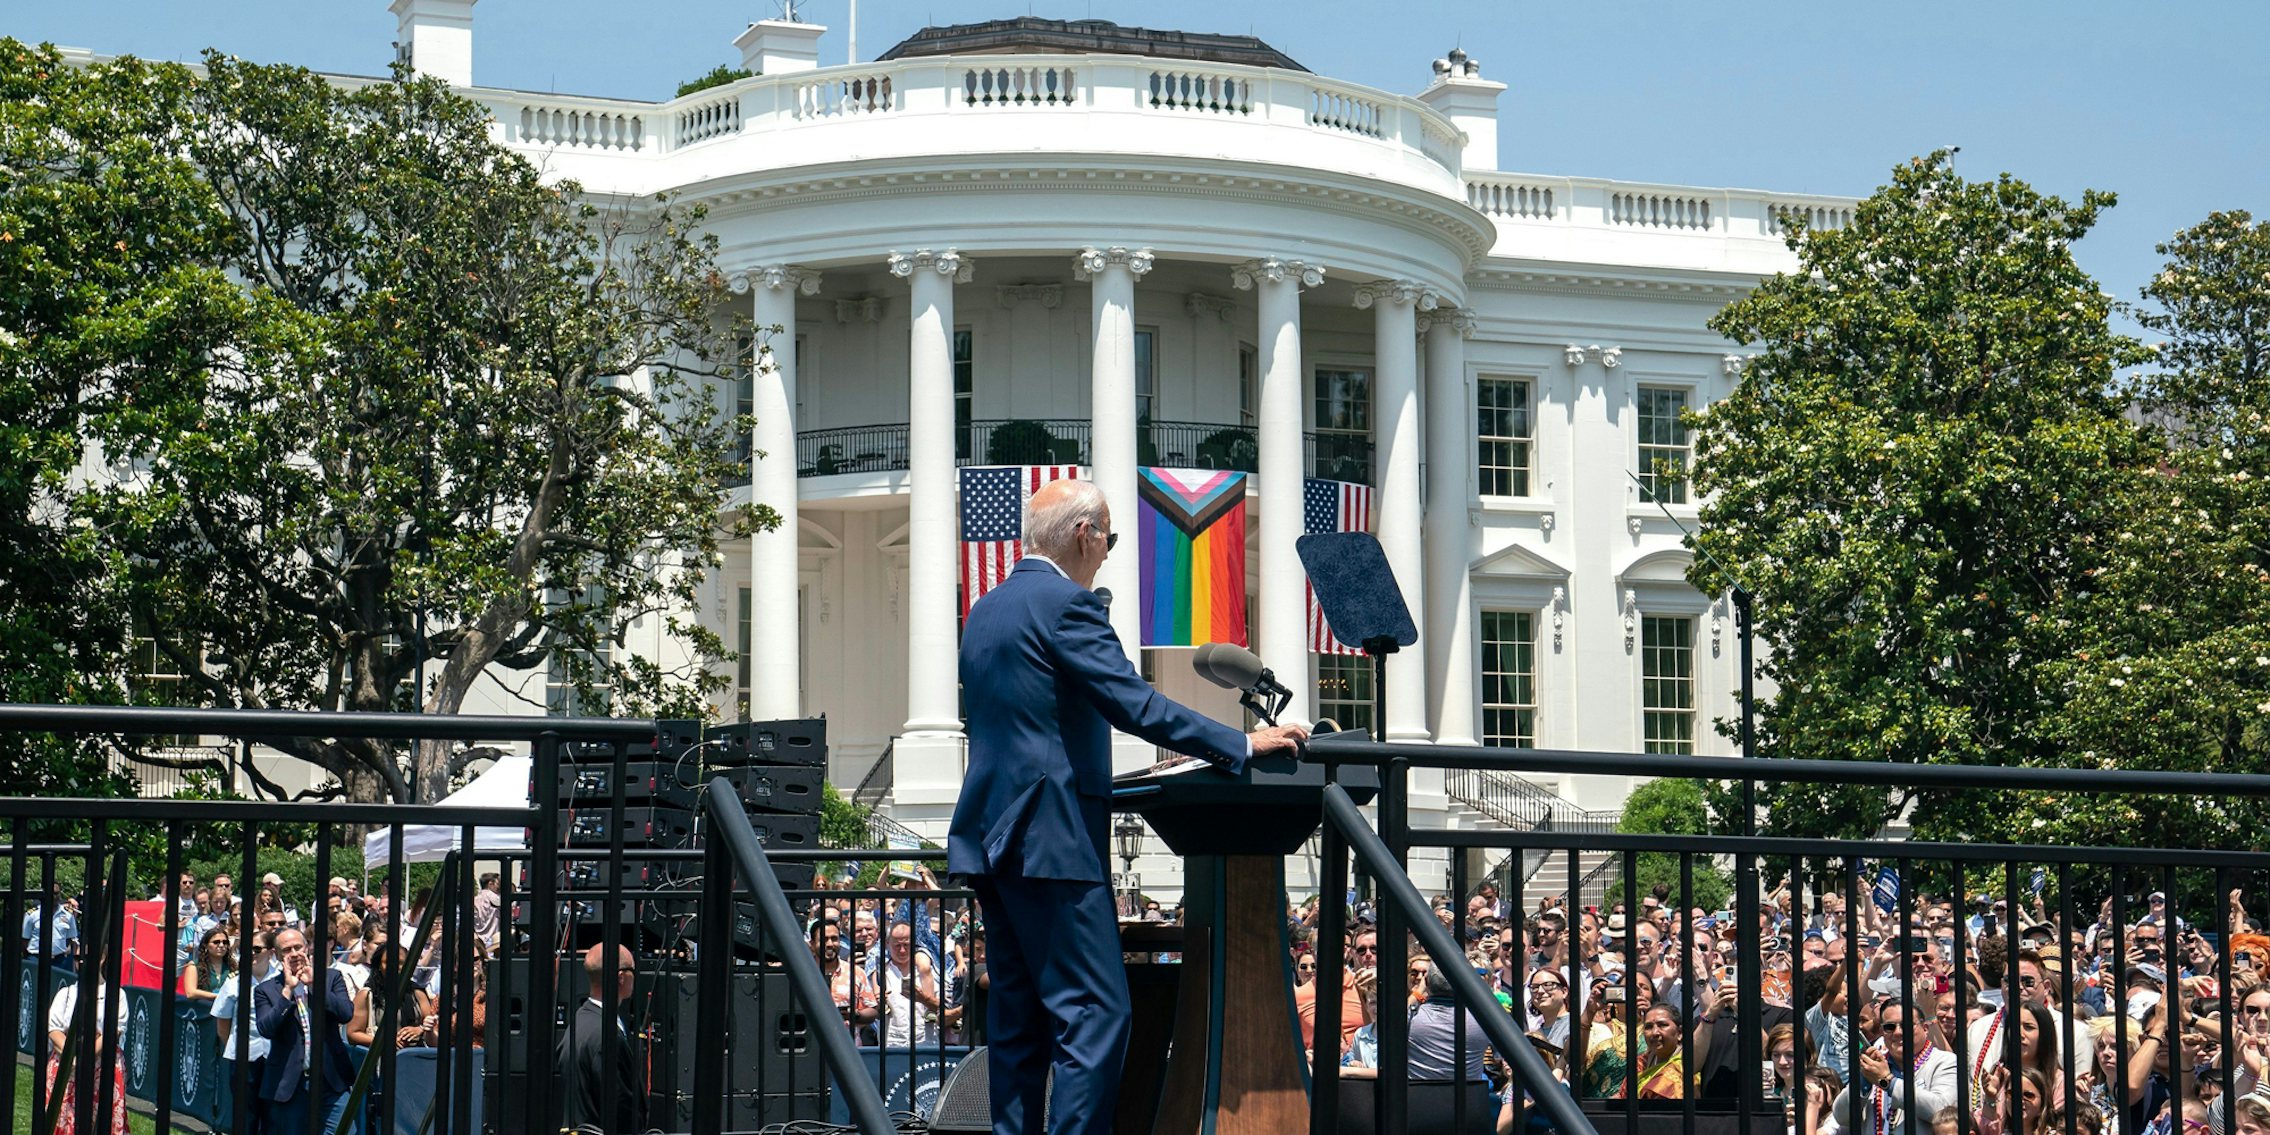 Joe Biden speaking at Pride Month Celebration Event at the White House, Washington, District of Columbia, United States with Pride flag hung up